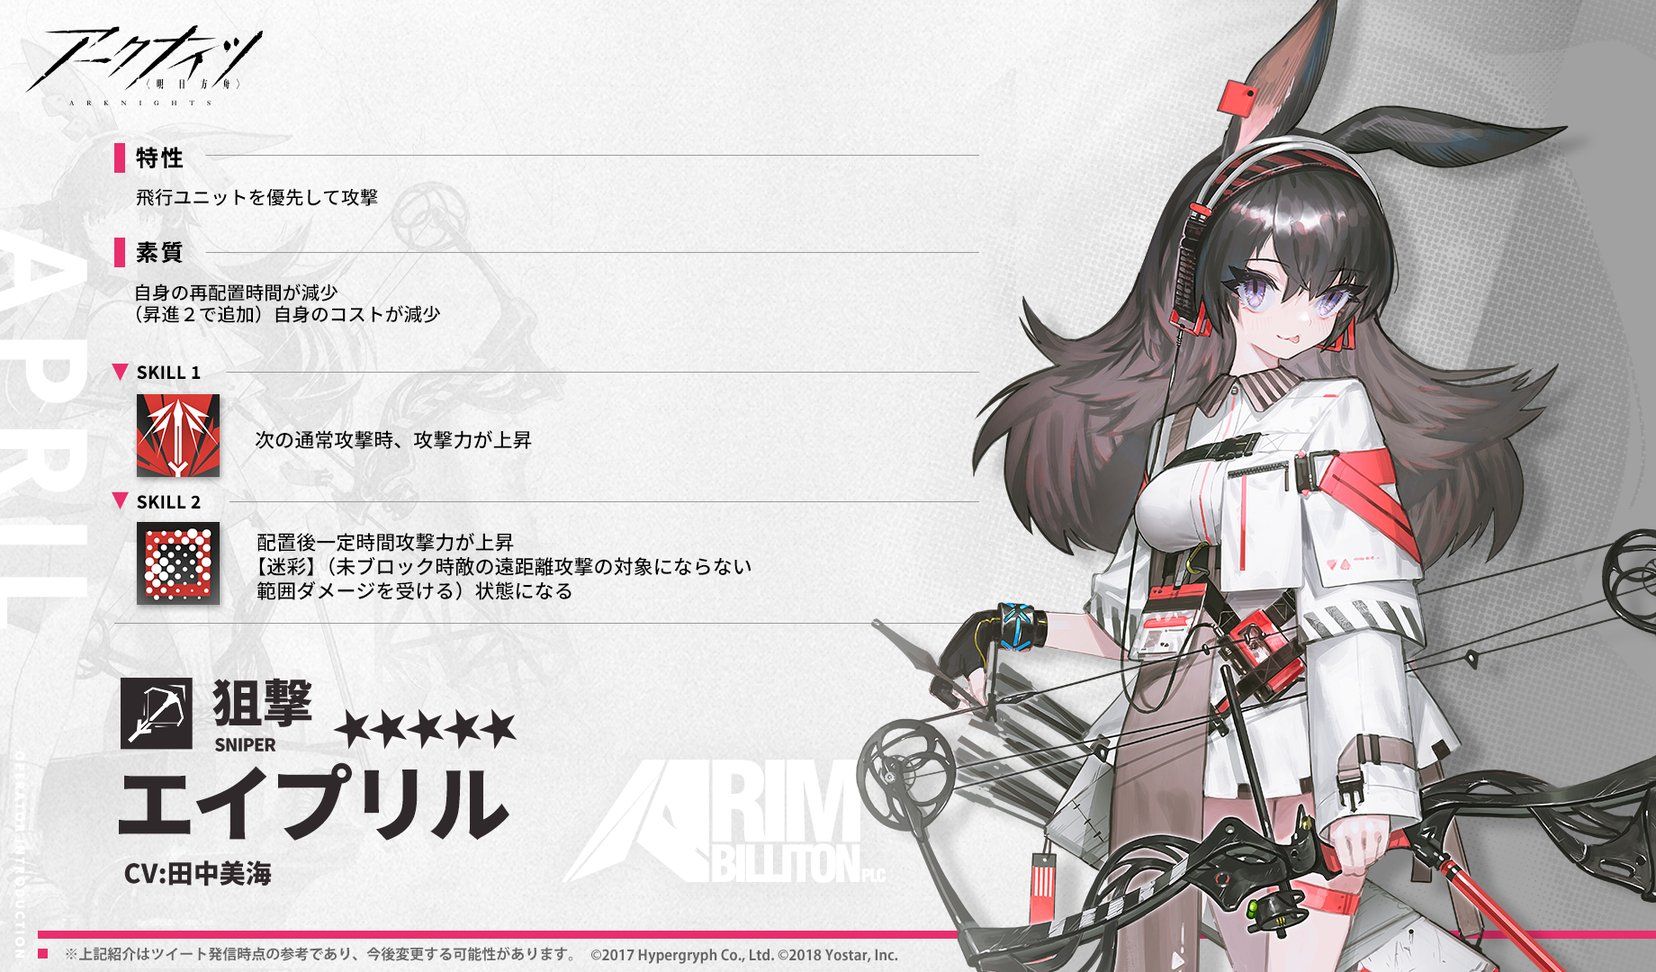 [Ark Knights] erotic big of new characters such as erotic girls of mutimuchi! 3